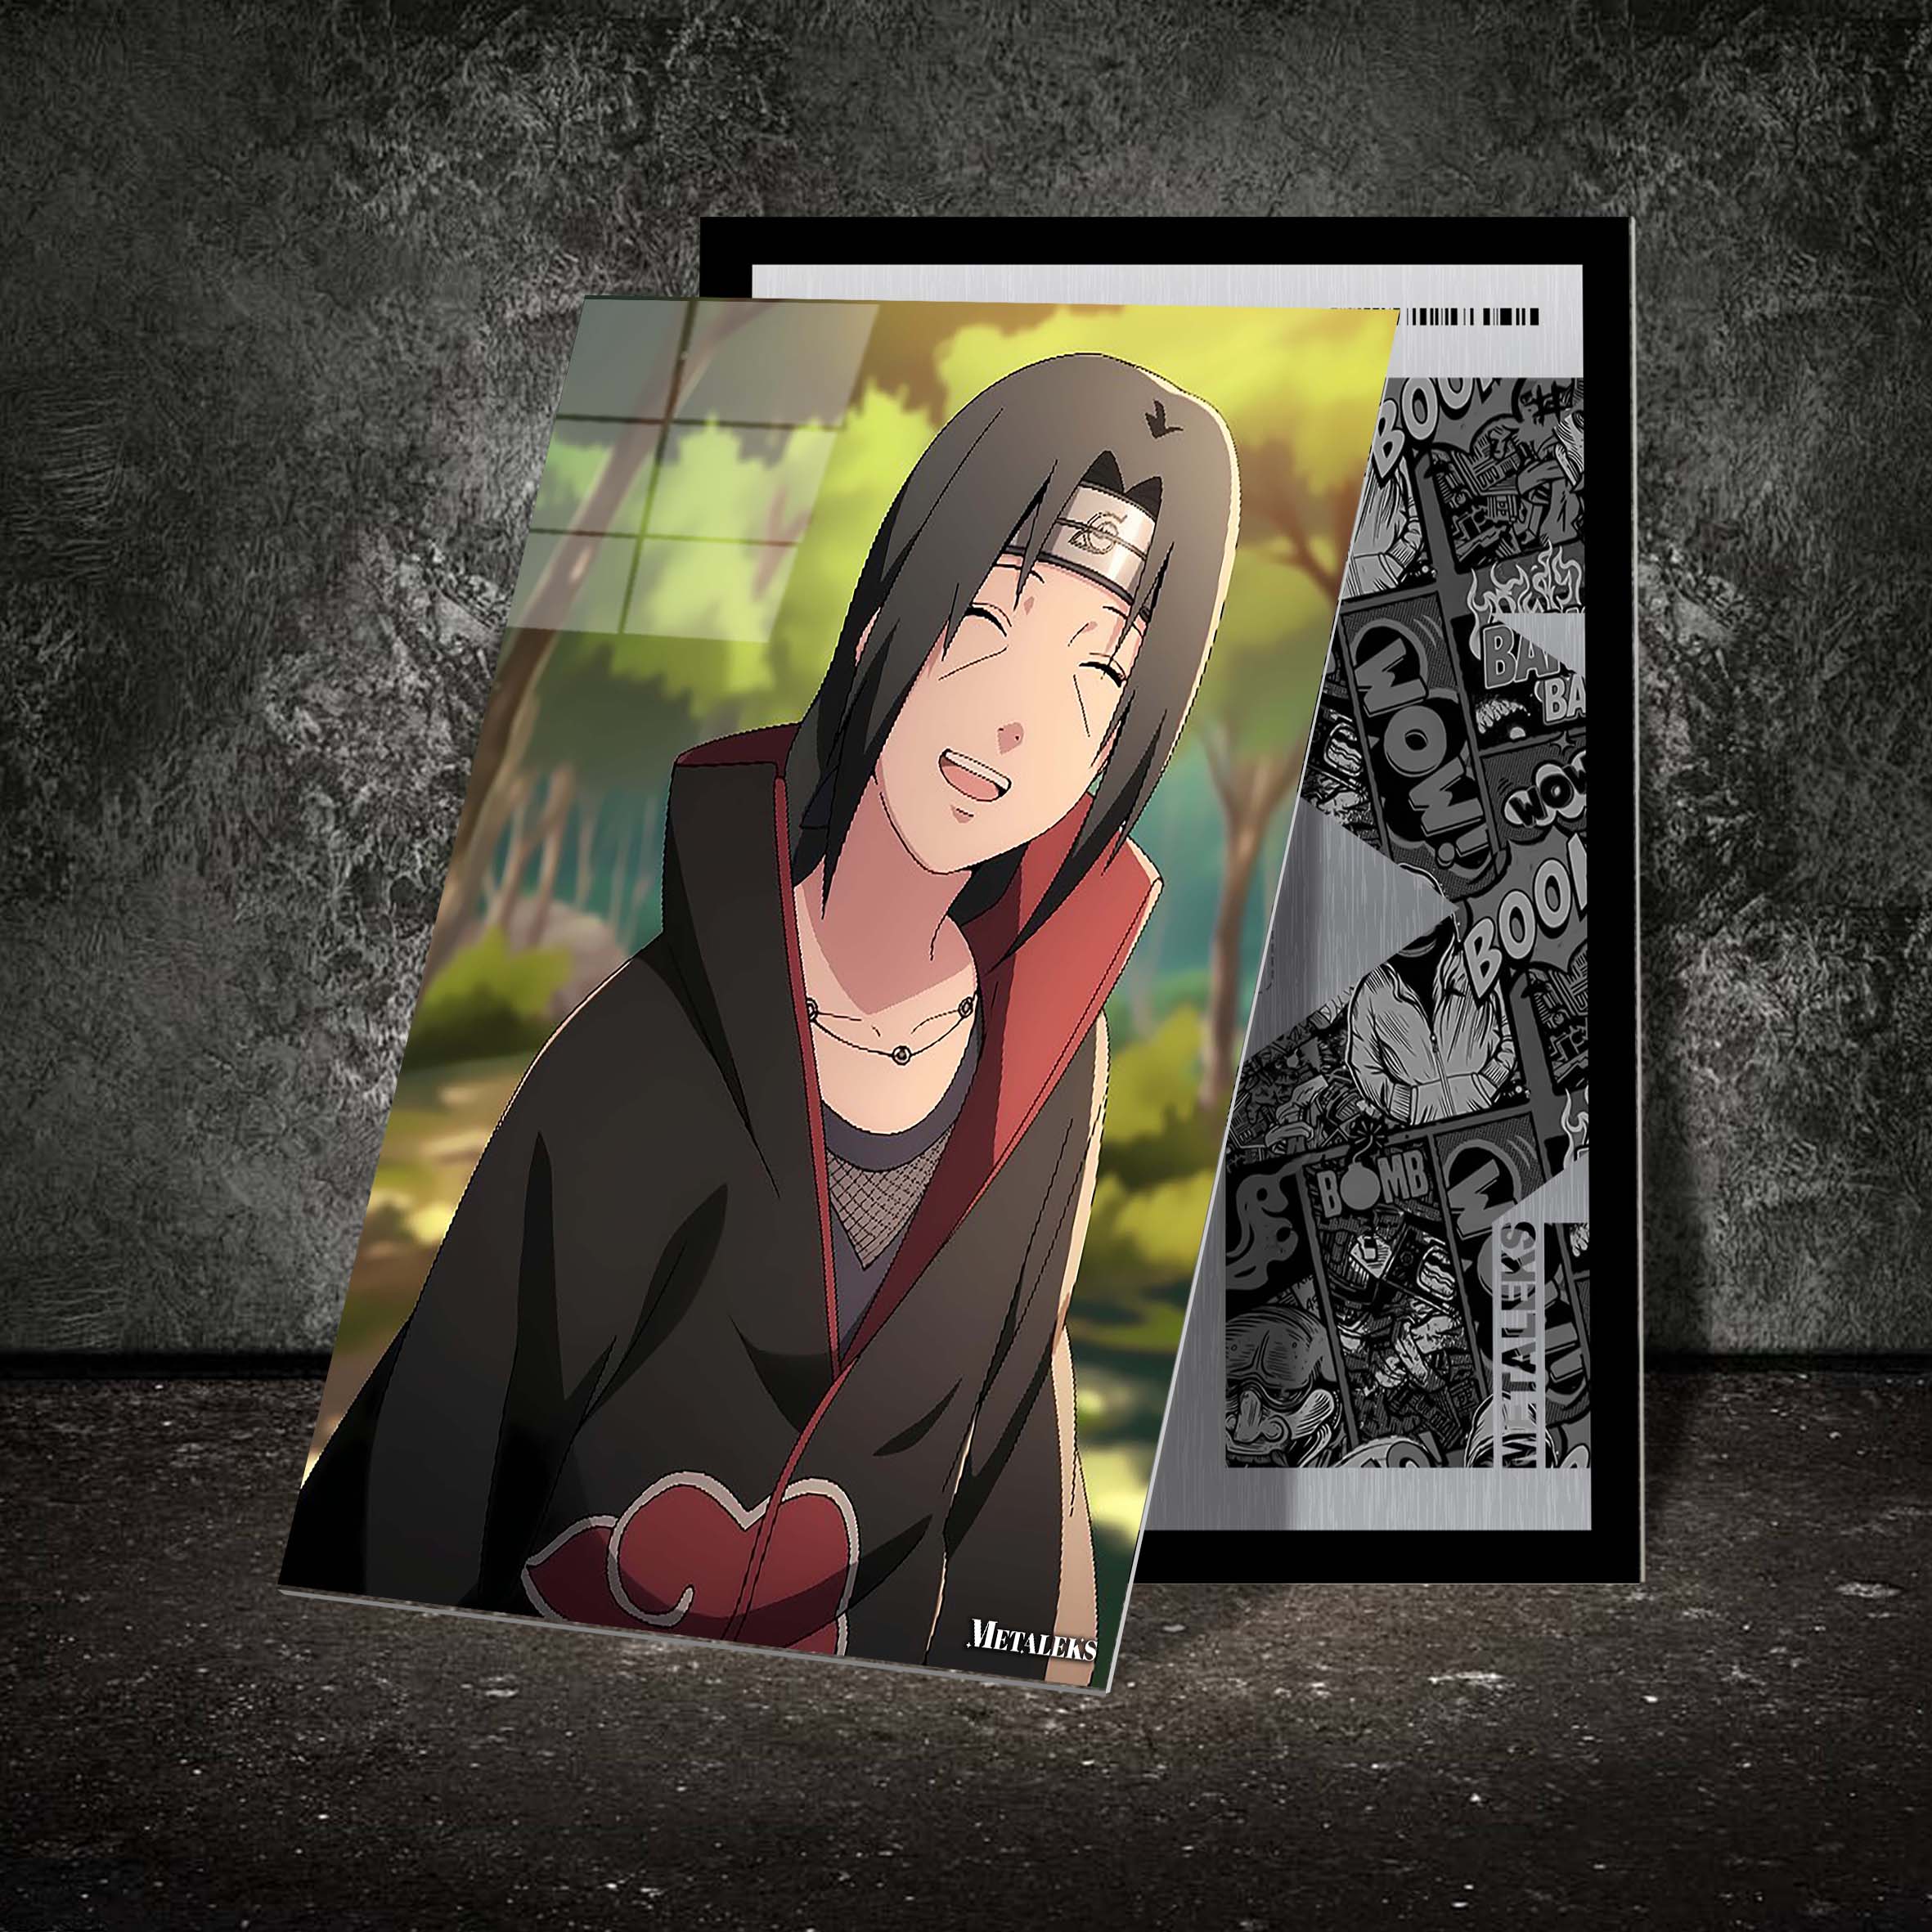 Itachi uchiha in anime style-designed by @Vid_M@tion